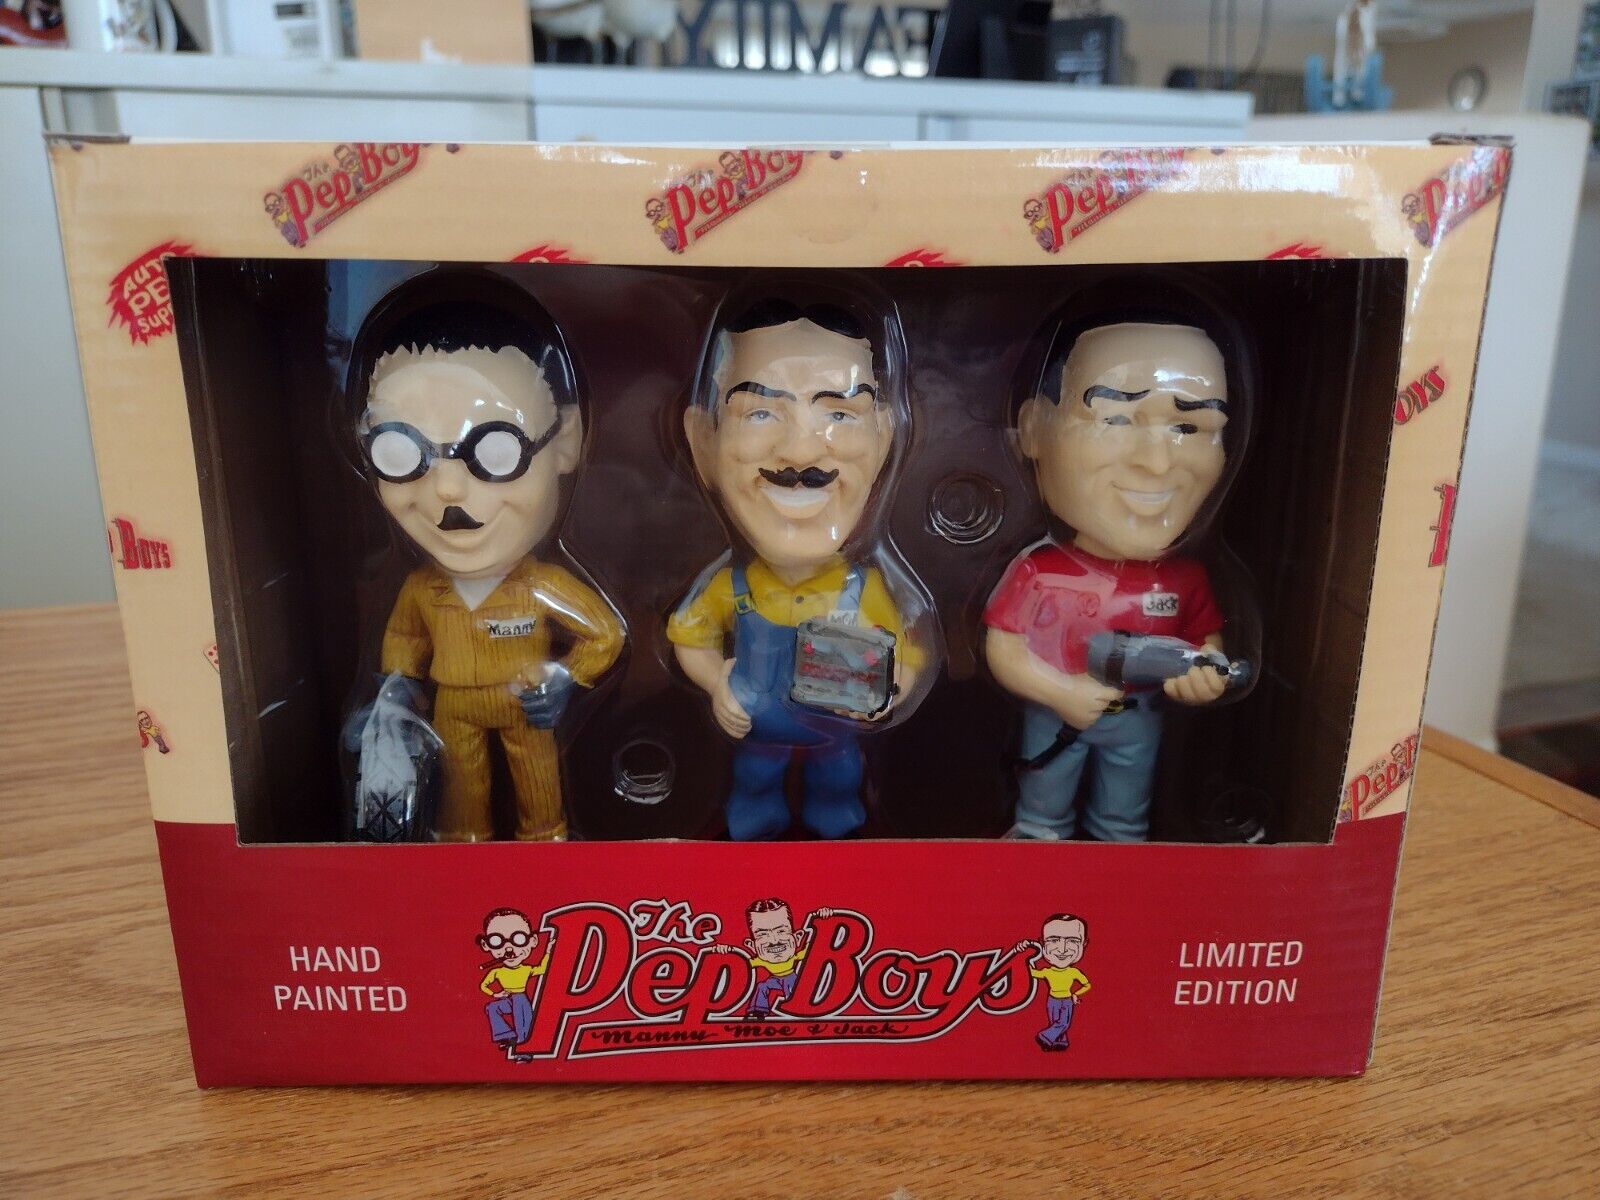 The Pep Boys Bobbleheads Limited Edition New, Open Box